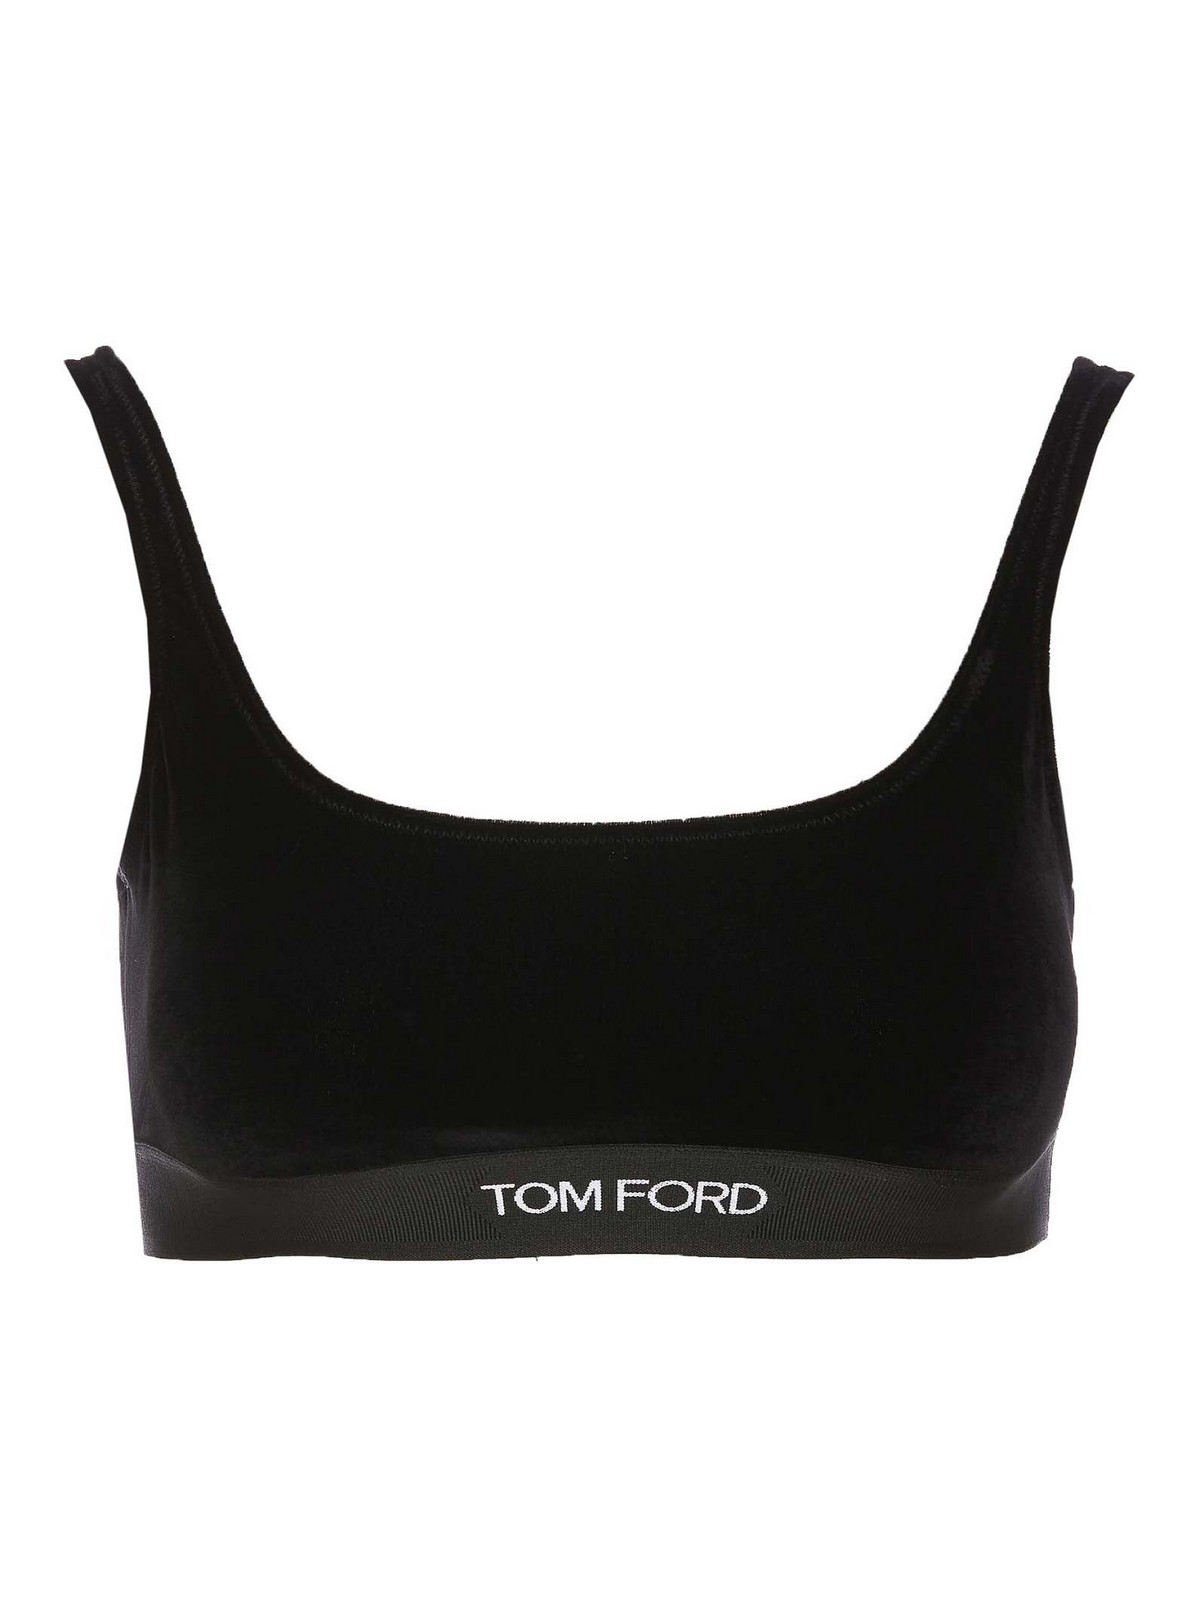 TOM FORD TOP - NEGRO